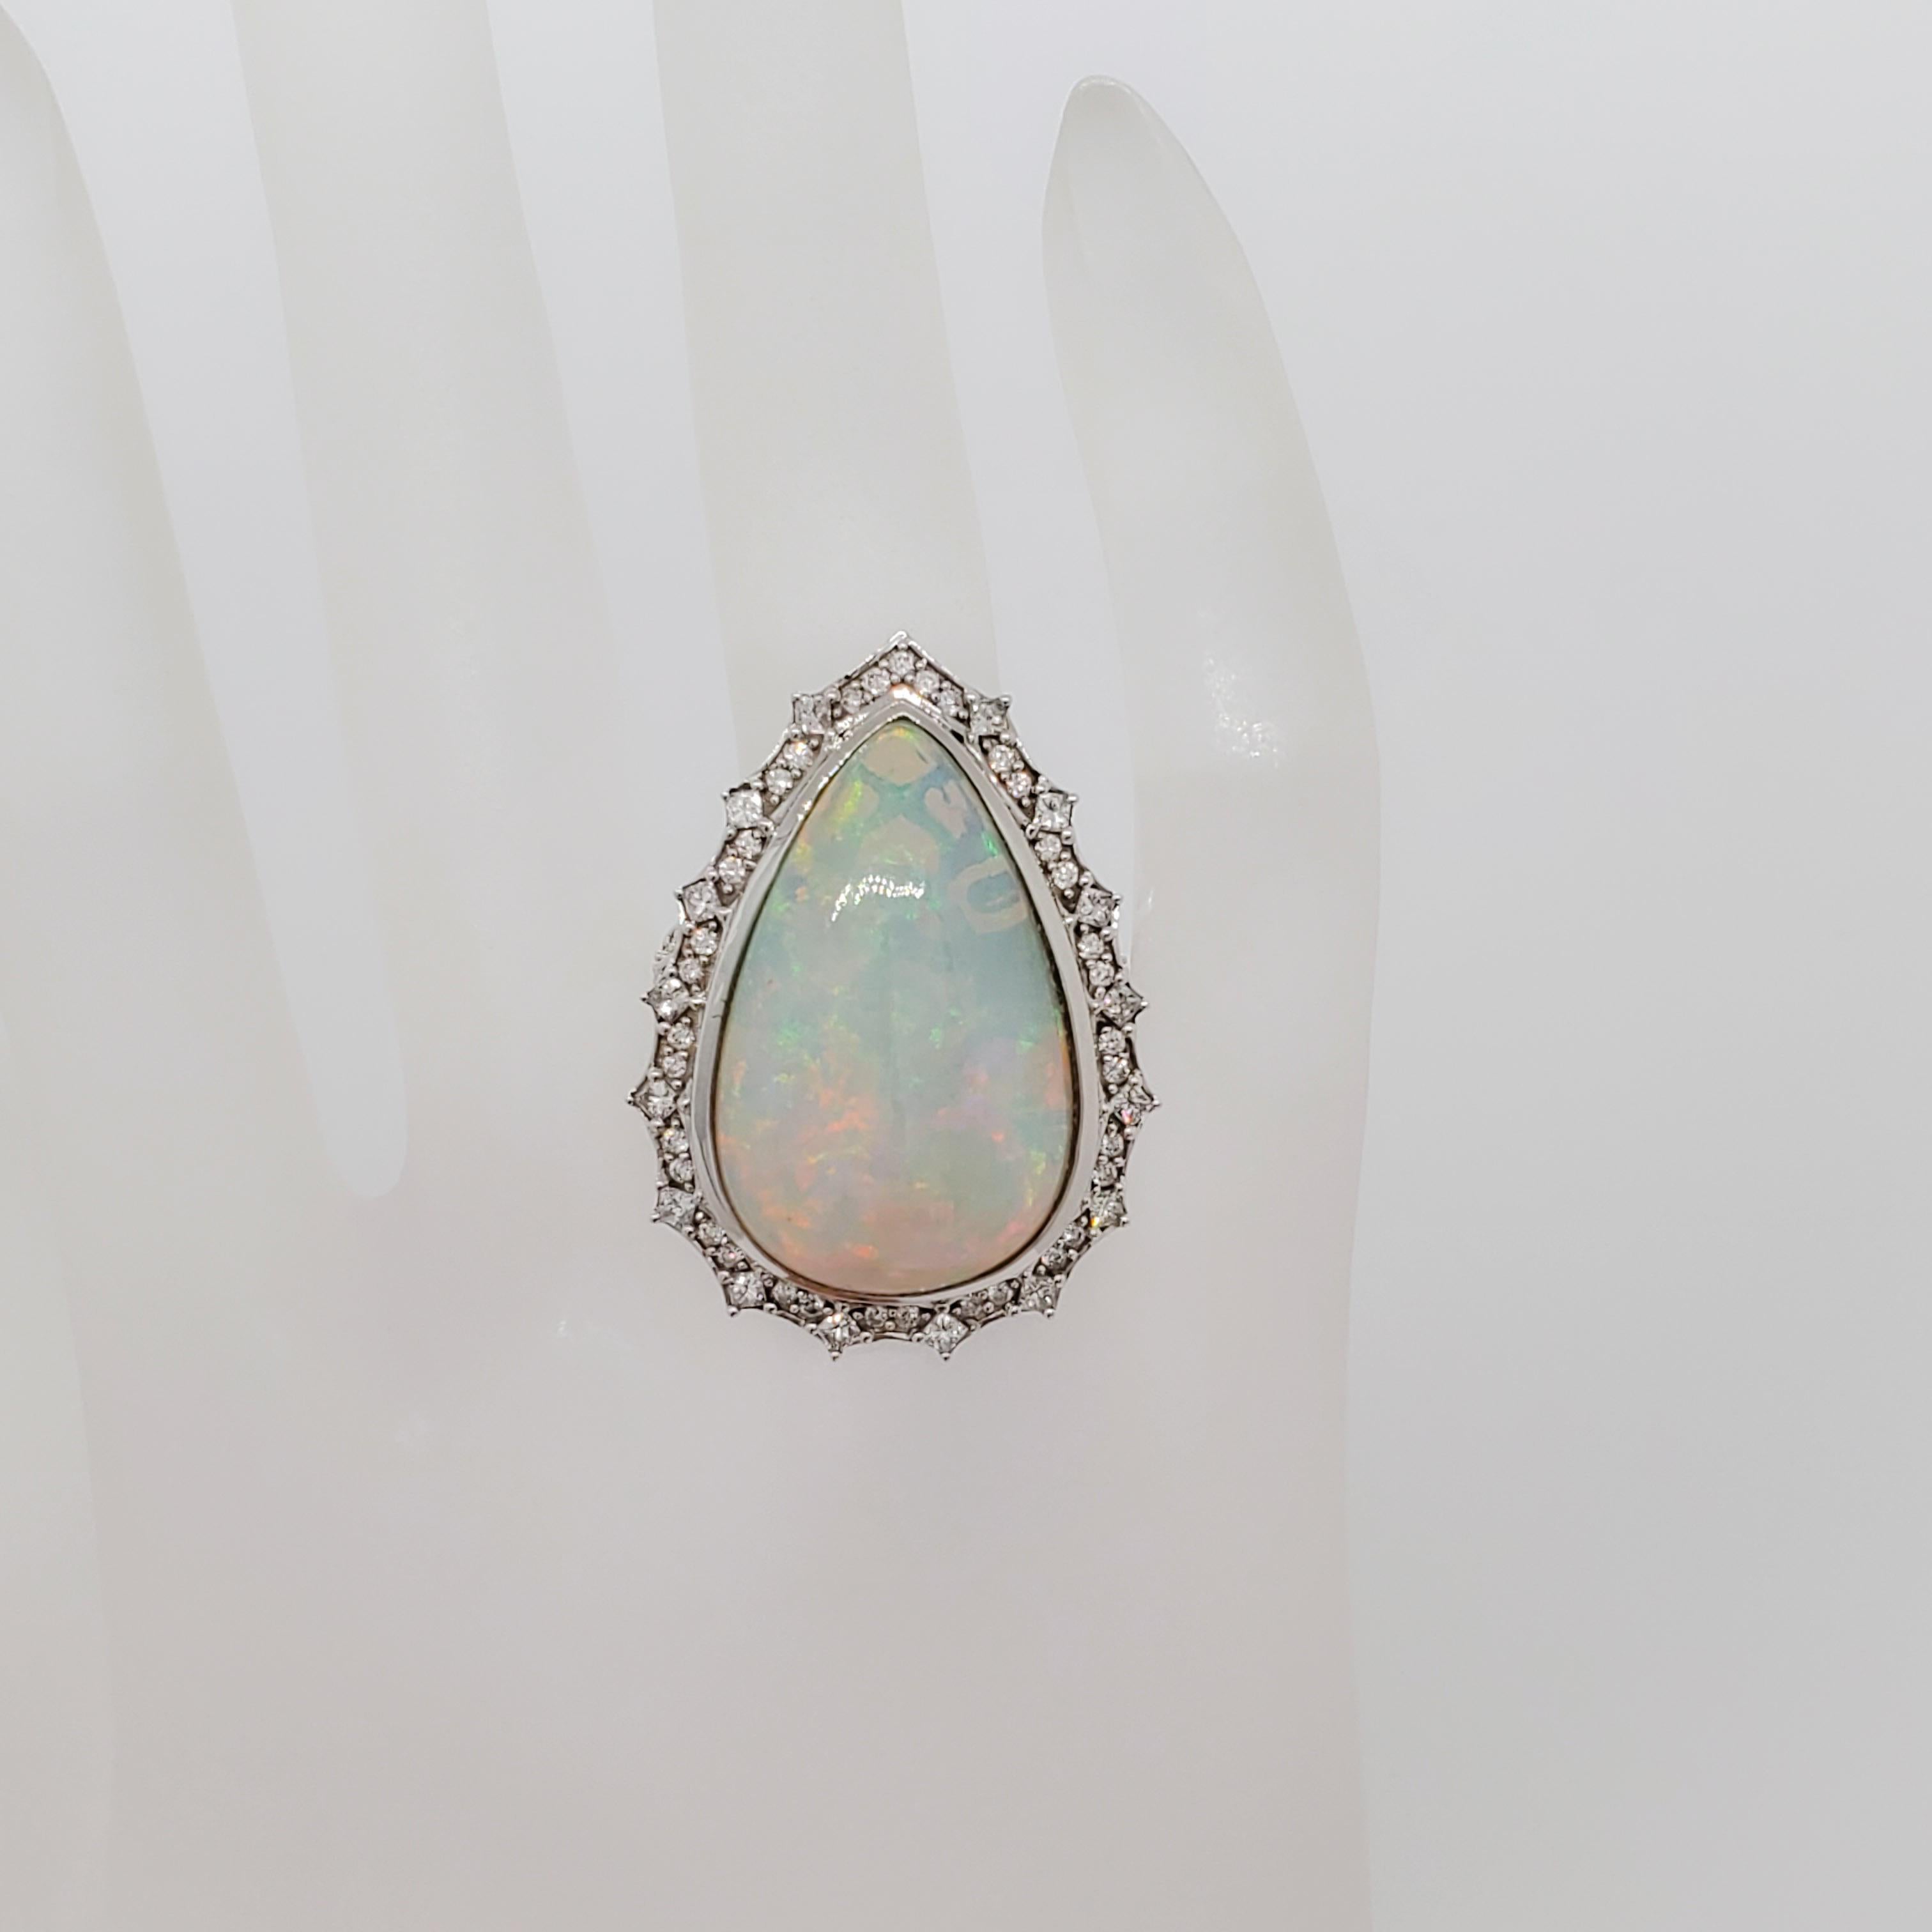 Black Opal Pear Shape and White Diamond Cocktail Ring in 18k White Gold 1